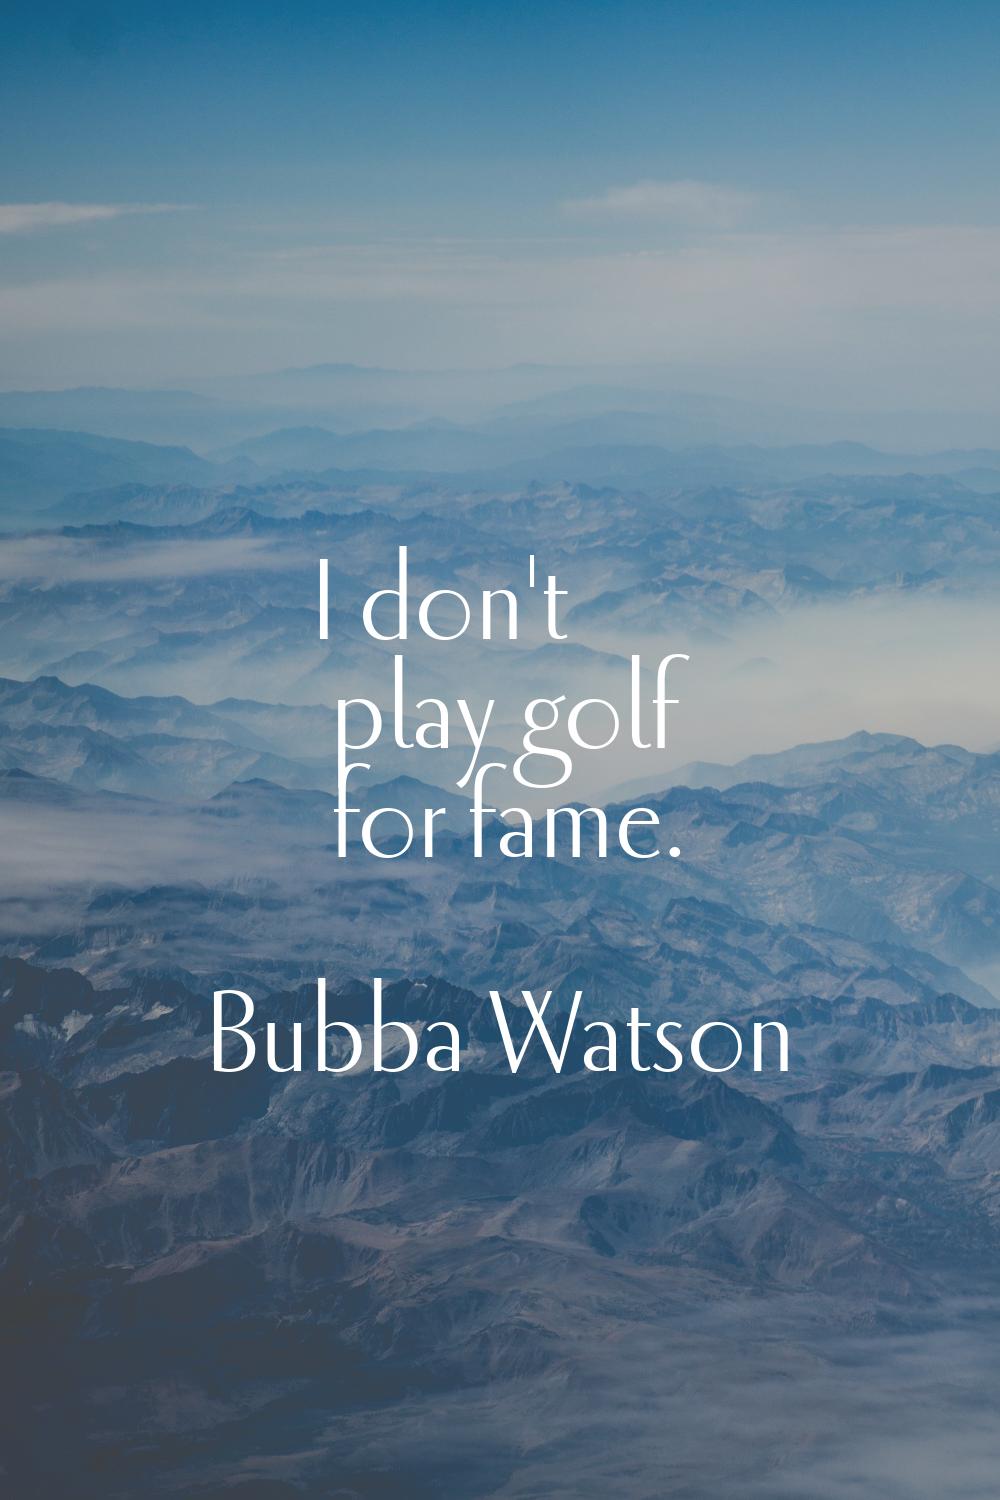 I don't play golf for fame.